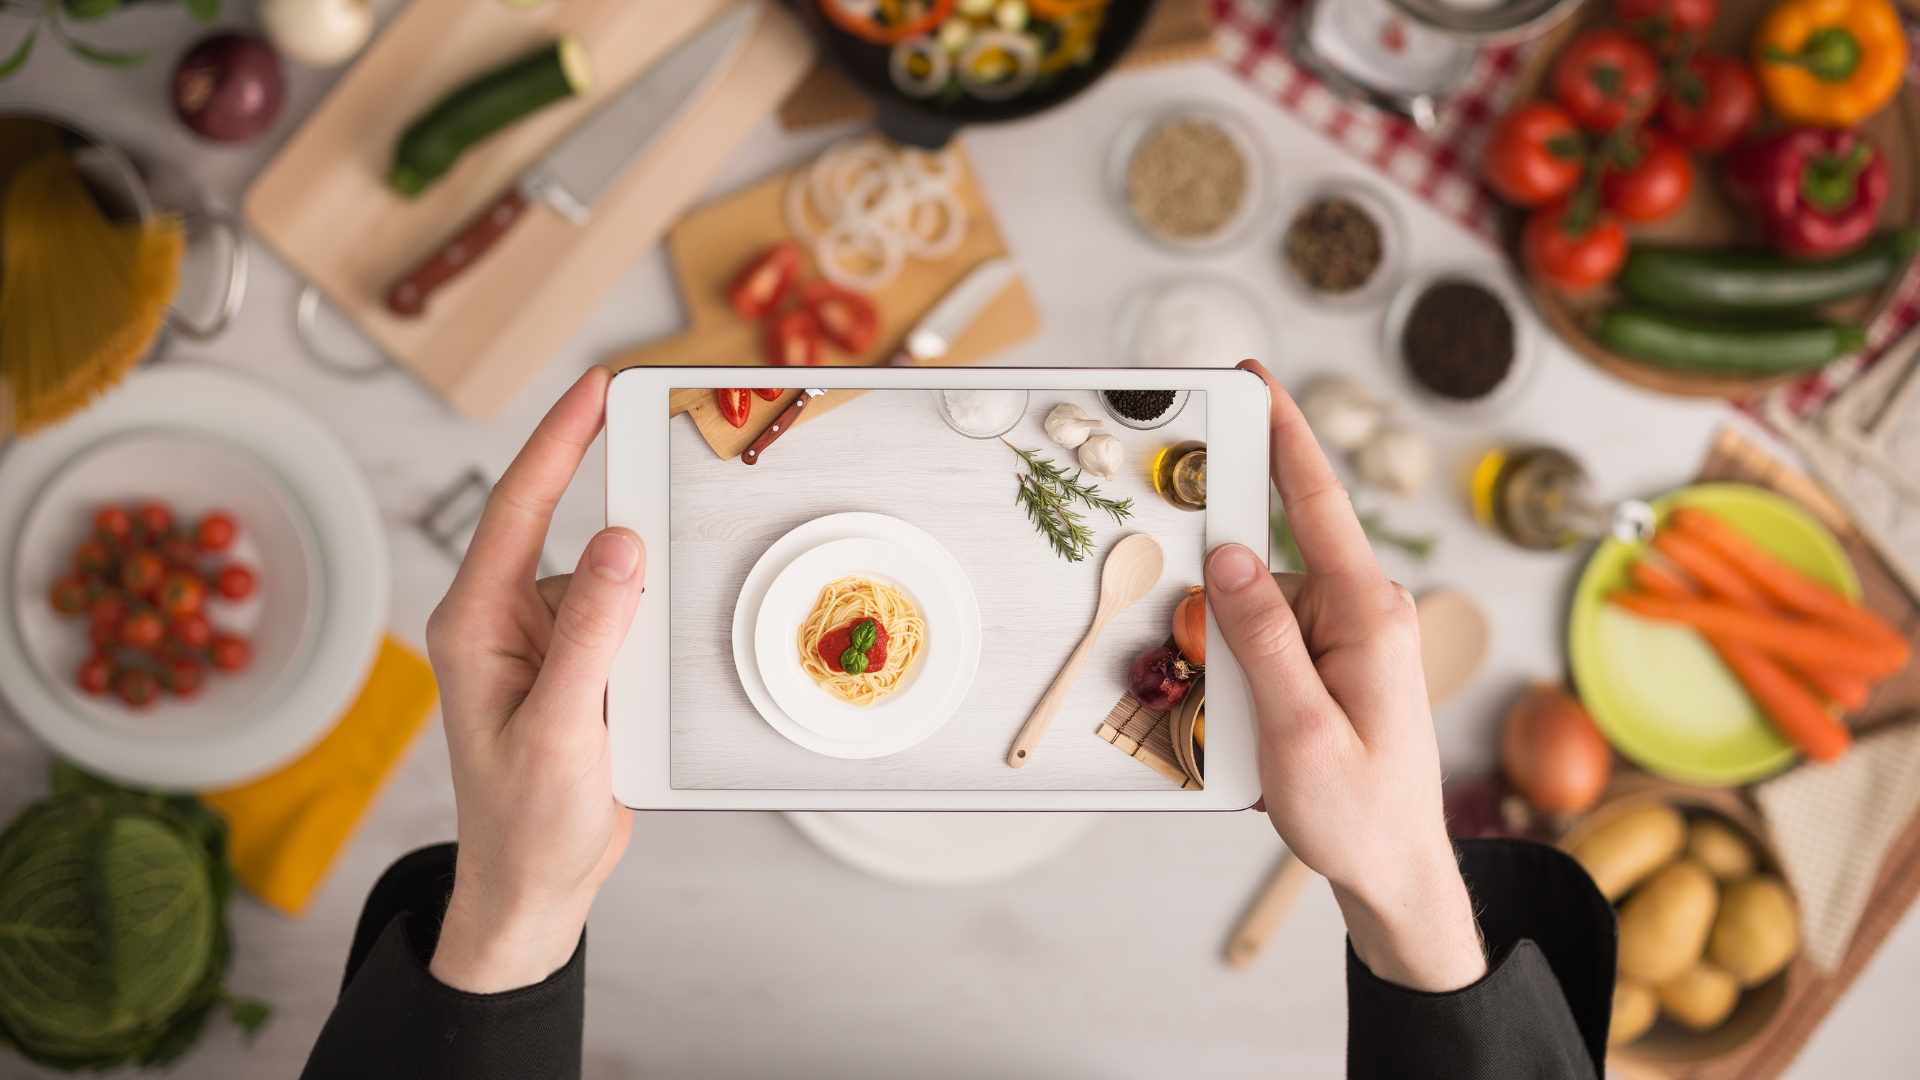 Online Ordering Apps: What Restaurants and QSRs Need to Know